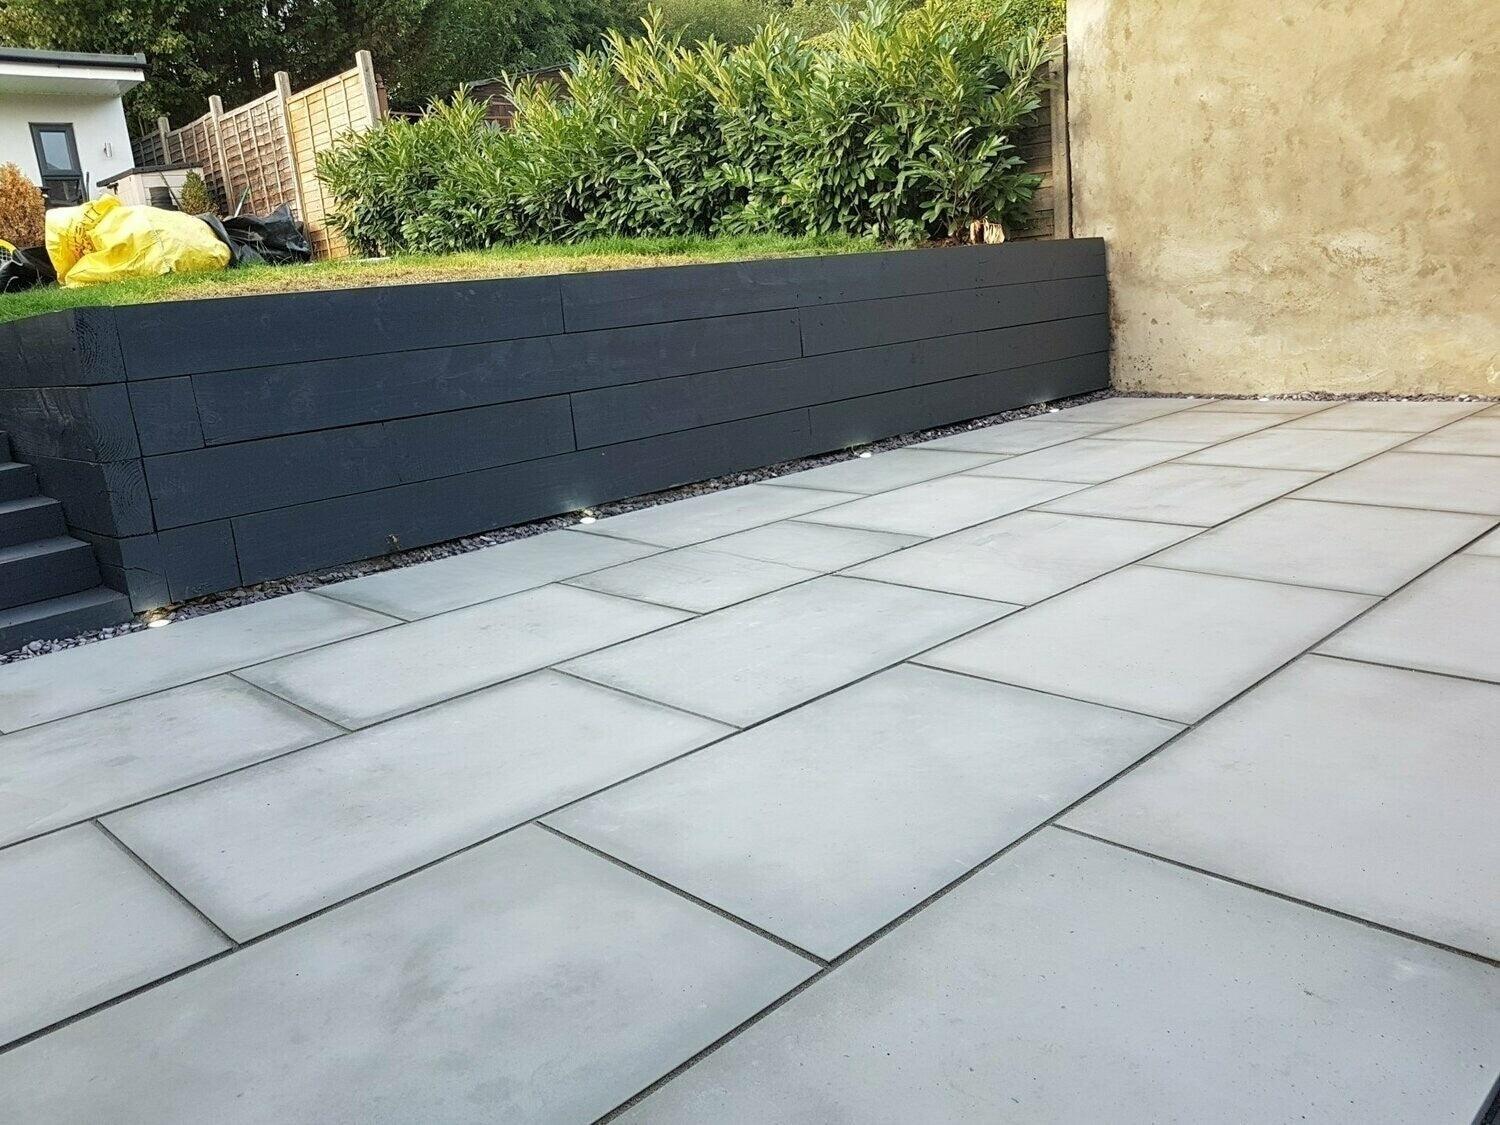 Smooth Indian stone paving ,Sandstone patio ,Discount paving ,Landscape contractors near me